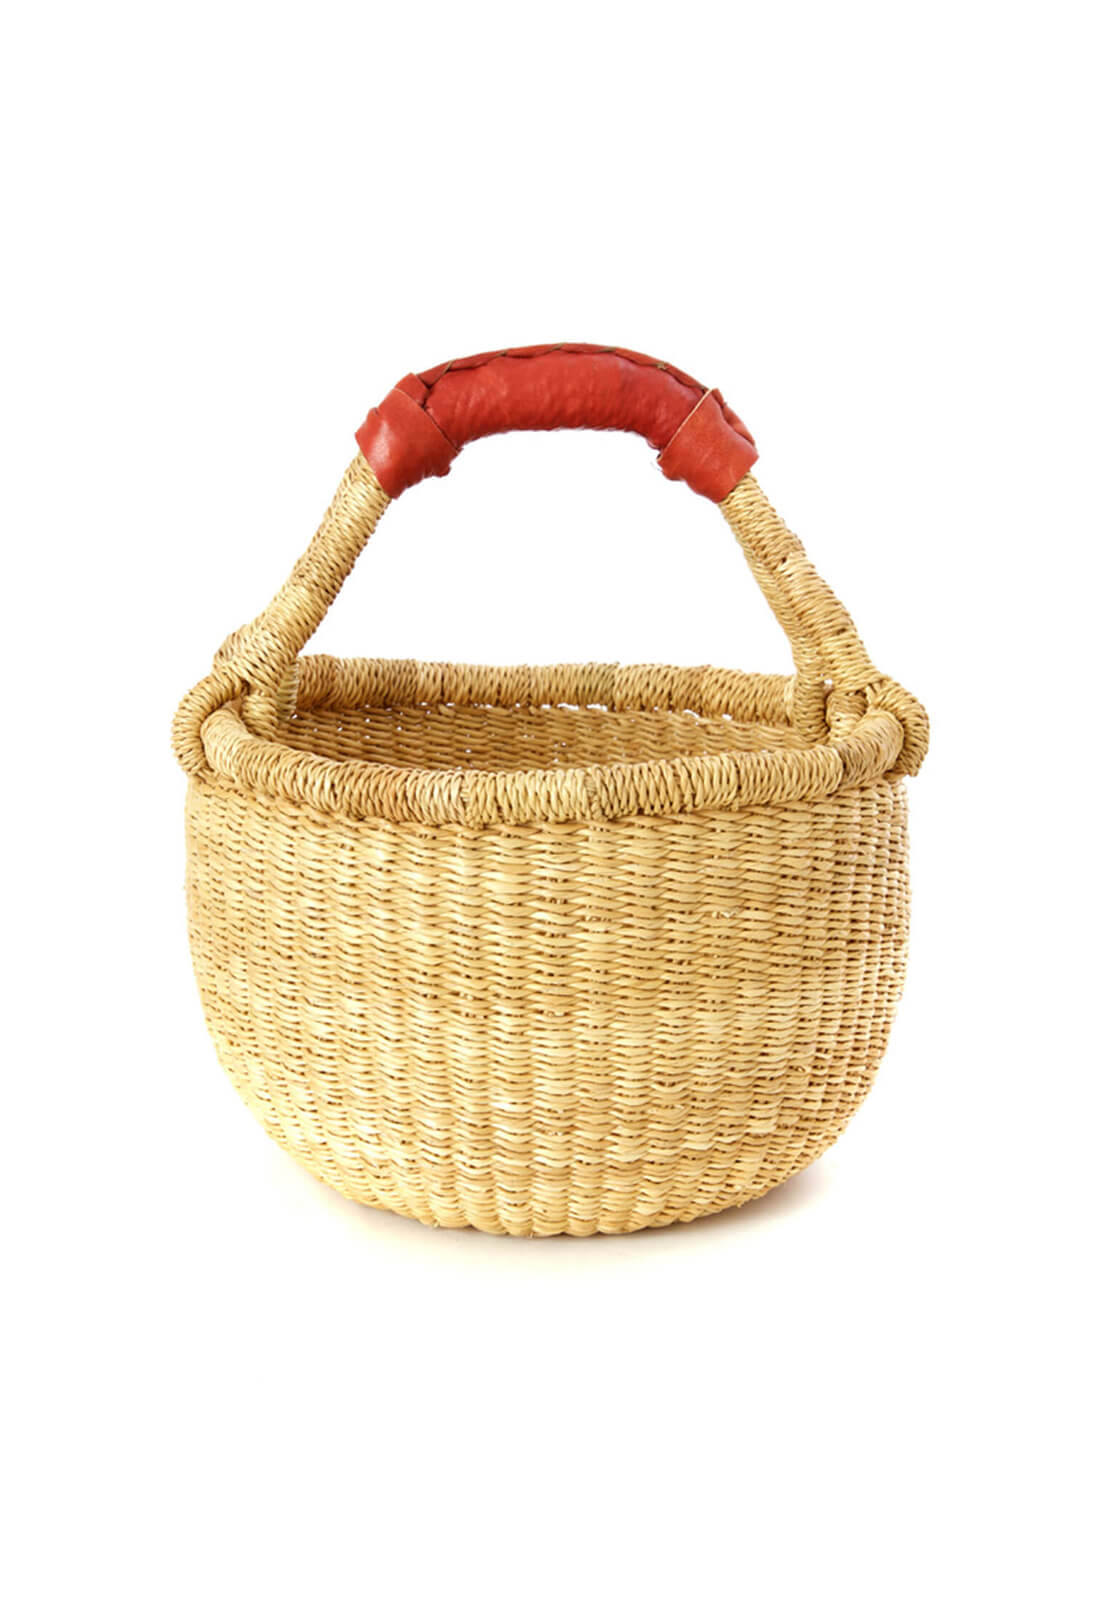 Small bolga basket, made in Ghana from tan elephant grass and red brown leather. 